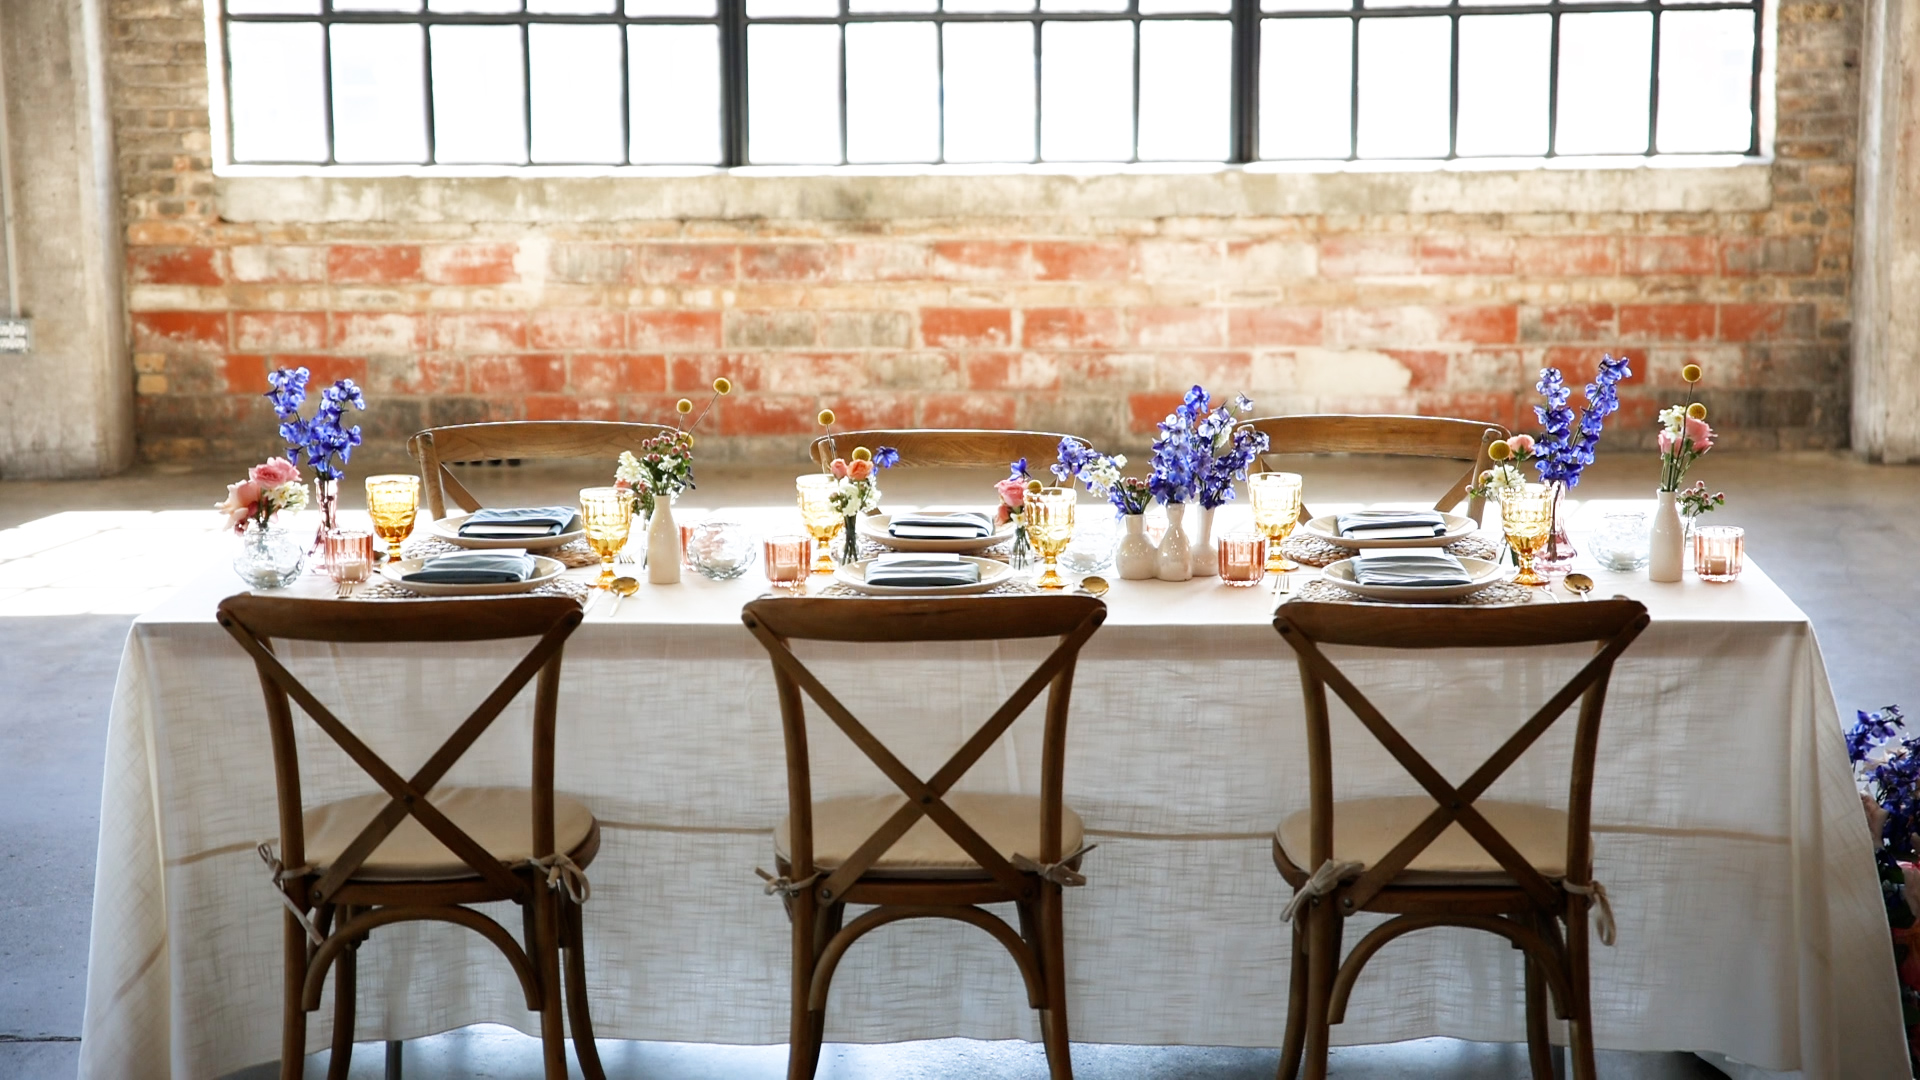 A table setting with blue flowers in front of a window in a brick wall in one of the best minneapolis wedding venues